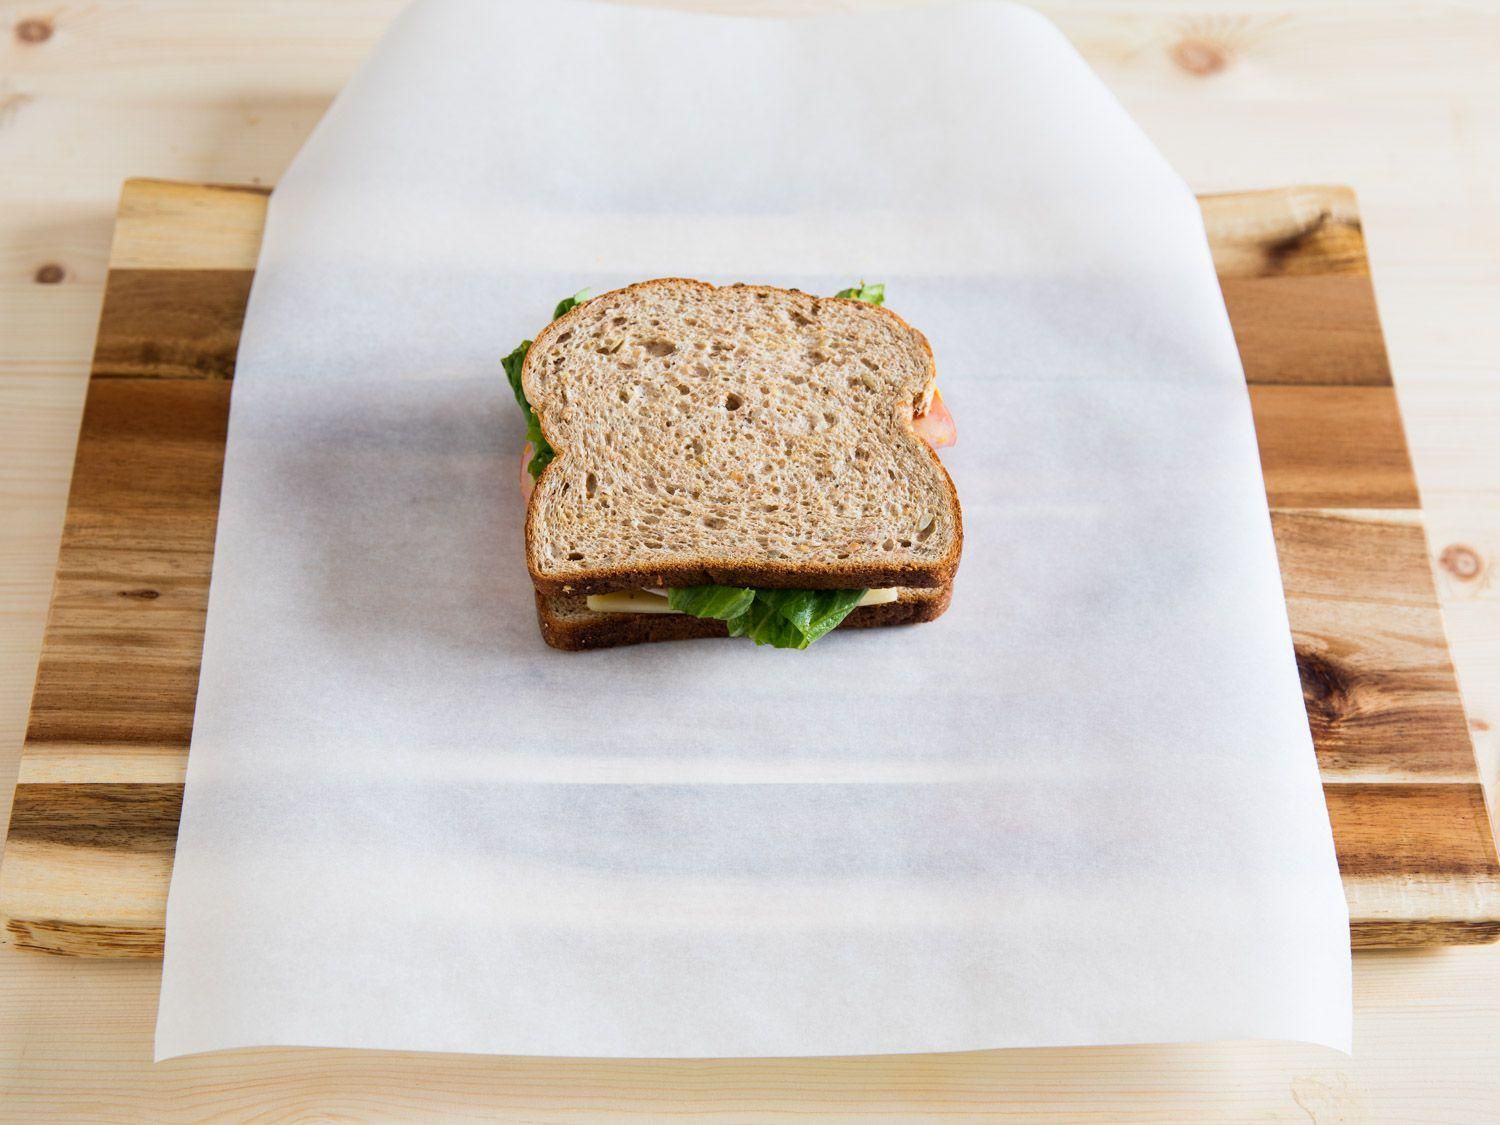 How Do You Wrap a Sandwich With Paper?